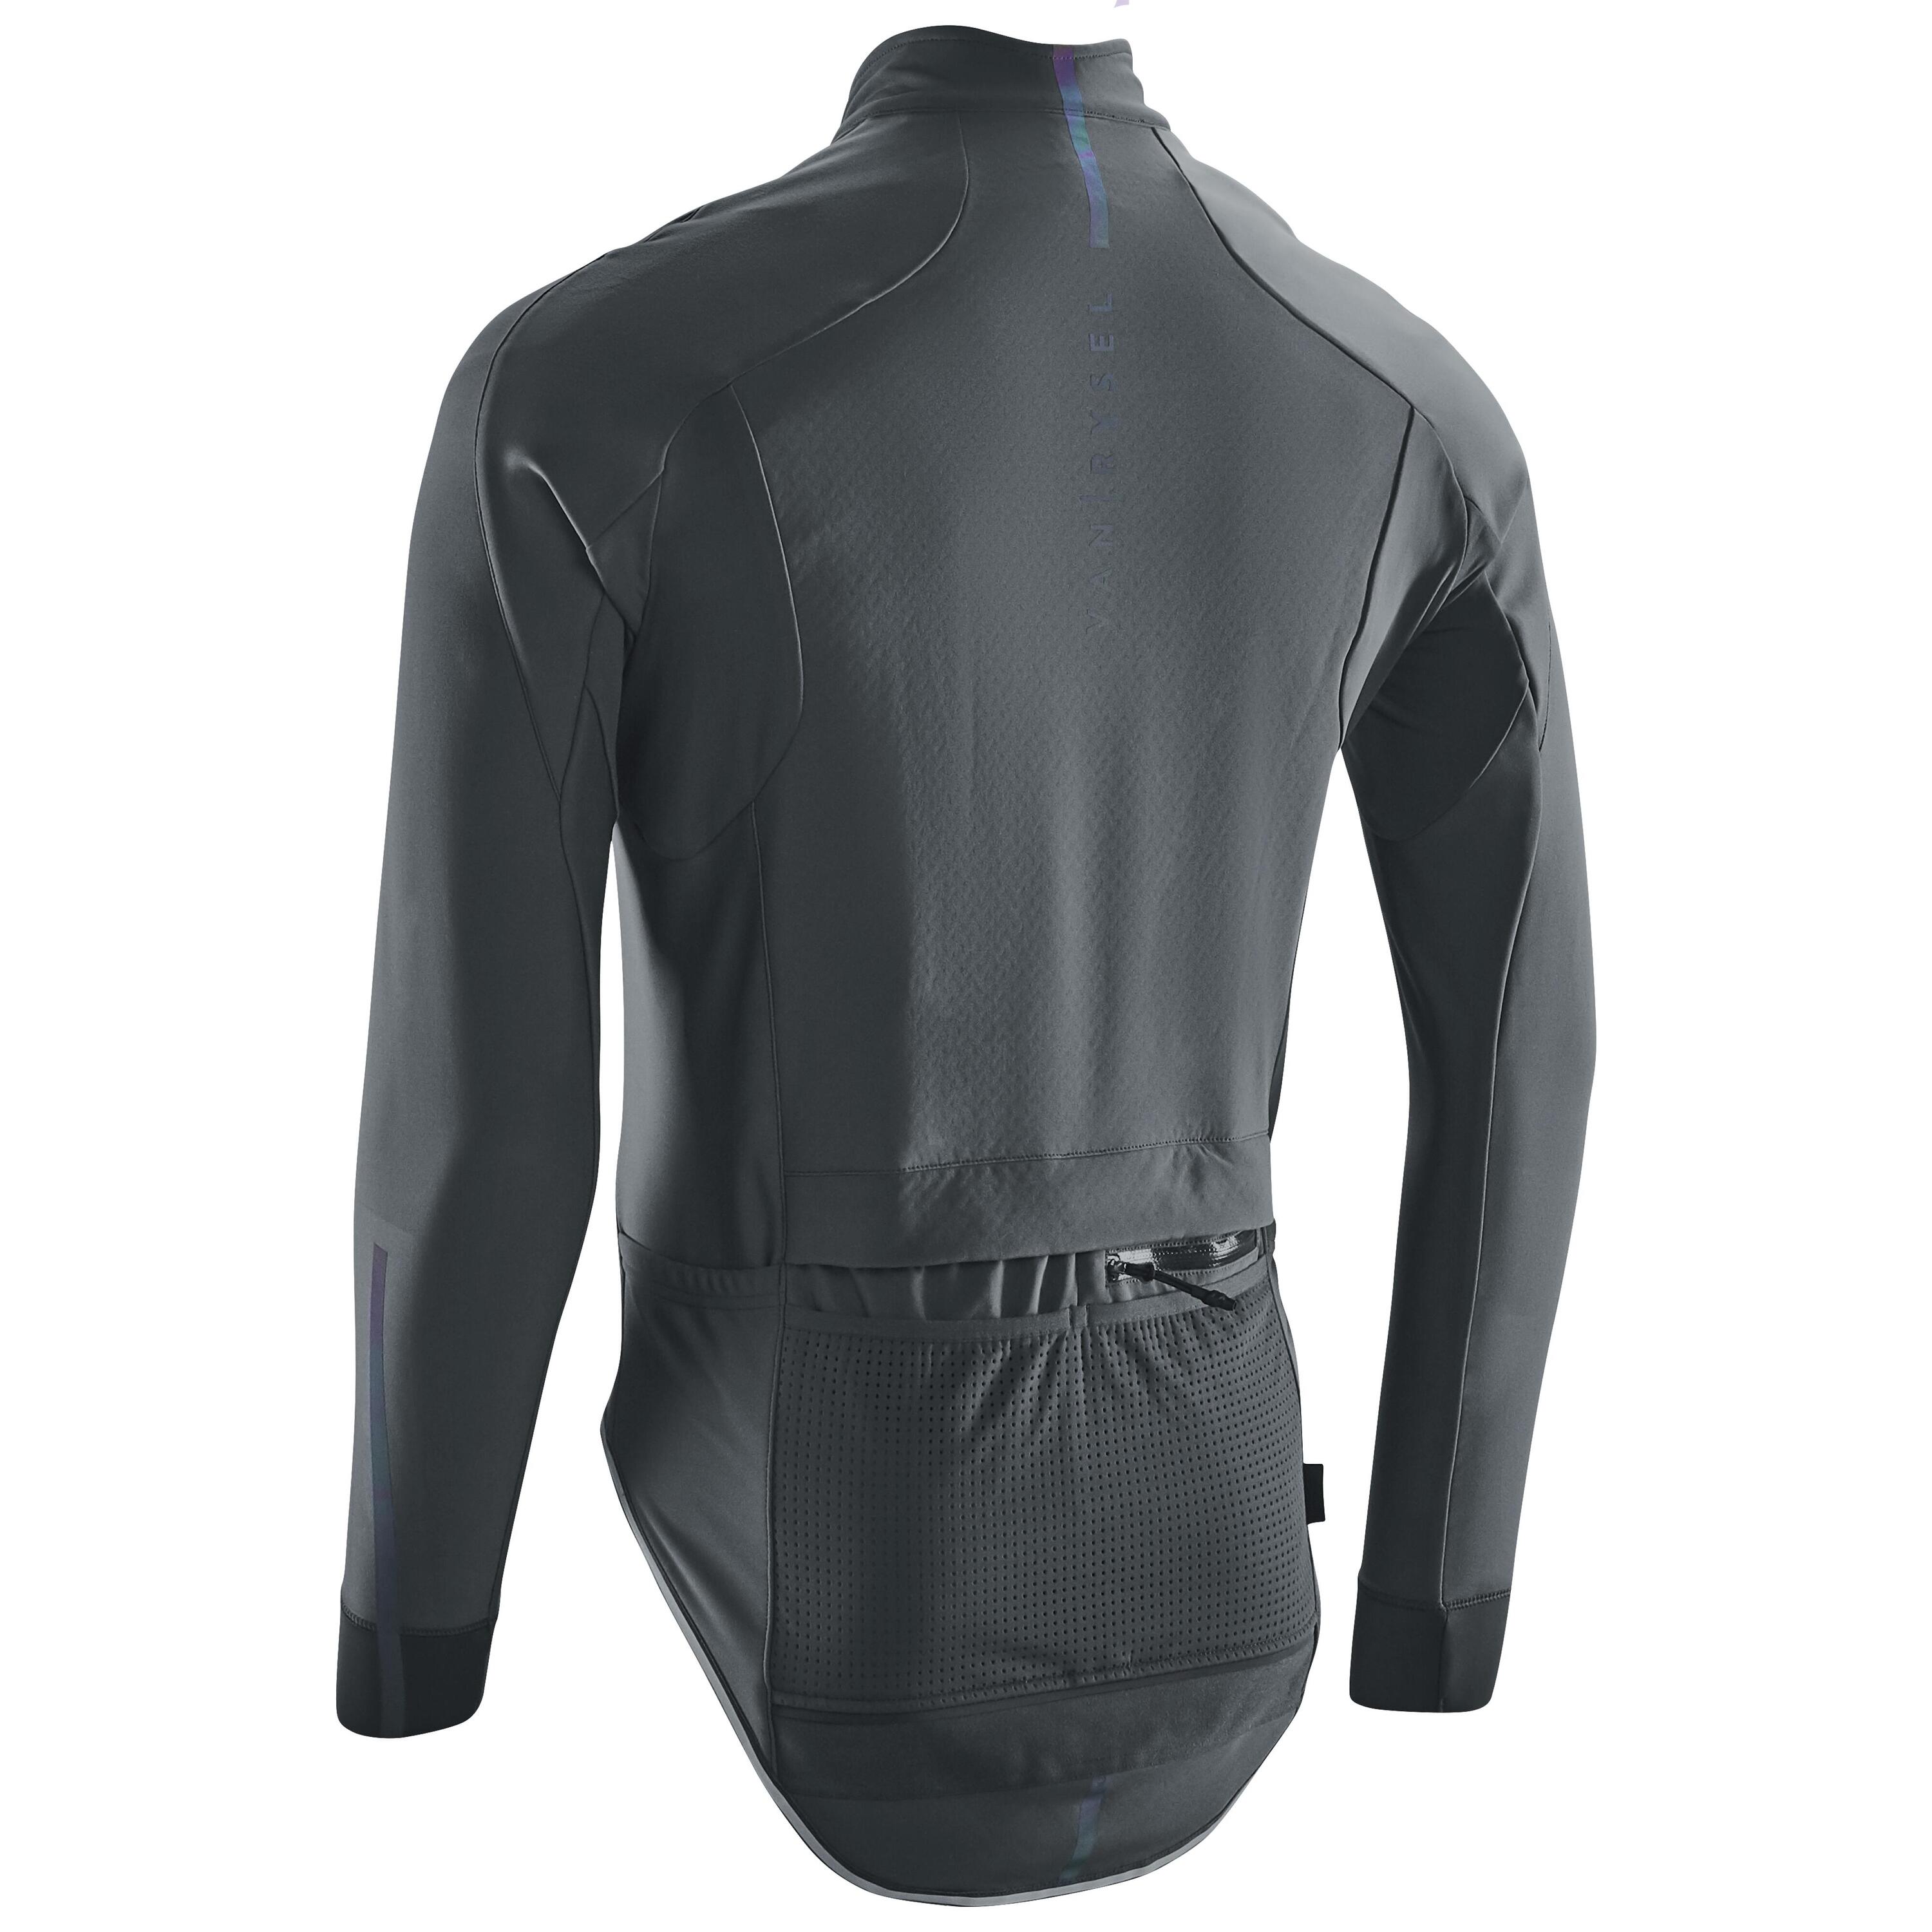 Men's Long-Sleeved Road Cycling Winter Jacket Racer Extreme - Abyss Grey 2/6